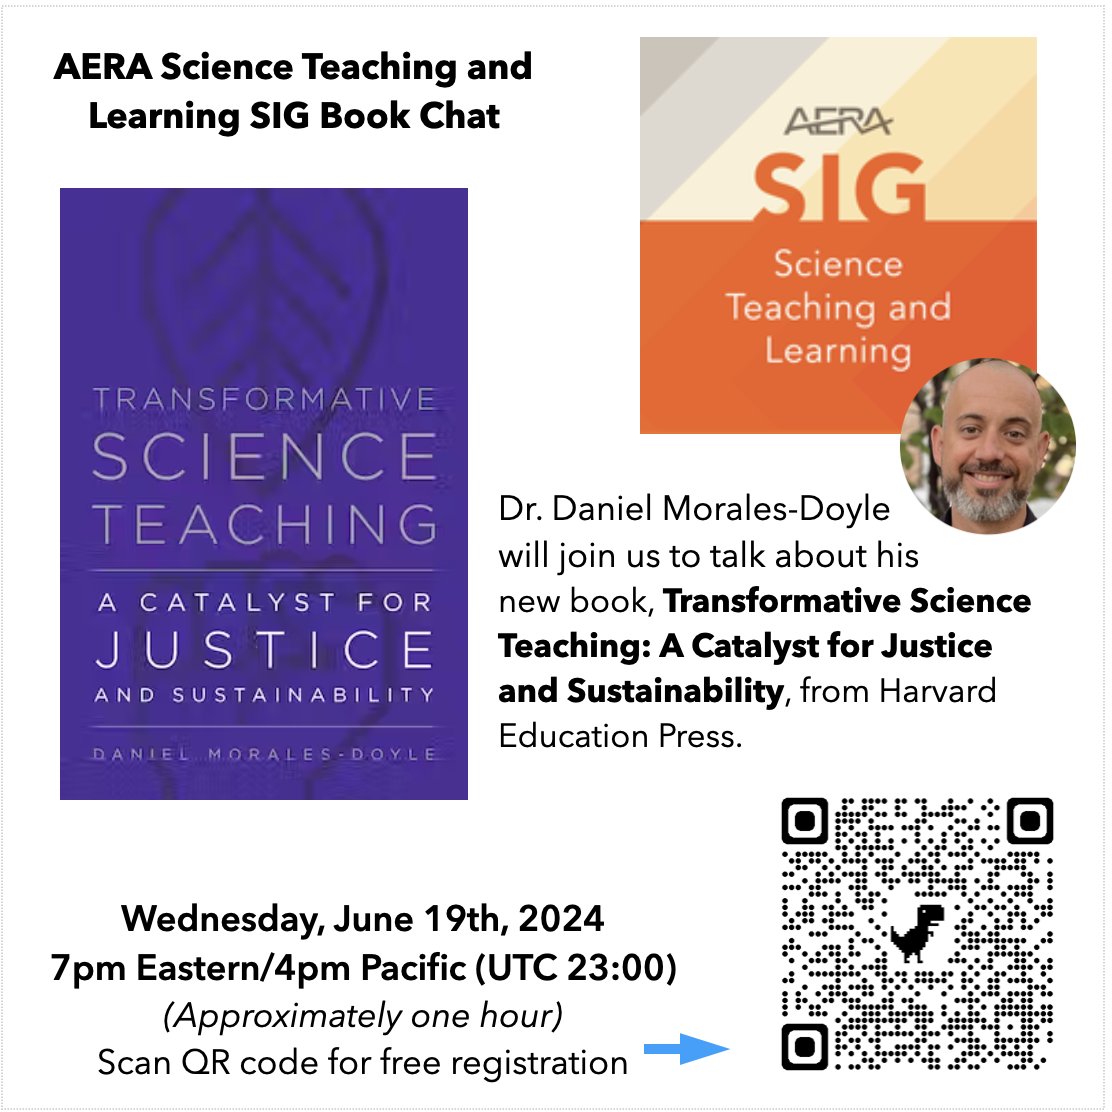 Join @aerastl on Zoom June 19th at 7pm EST/4pm PST for a chat with with Dr. Daniel Morales-Doyle about his new book, 'Transformative Science Teaching:
A Catalyst for Justice and Sustainability,' from
@Harvard_Ed_Pub. Register here: montclair.zoom.us/meeting/regist…
.